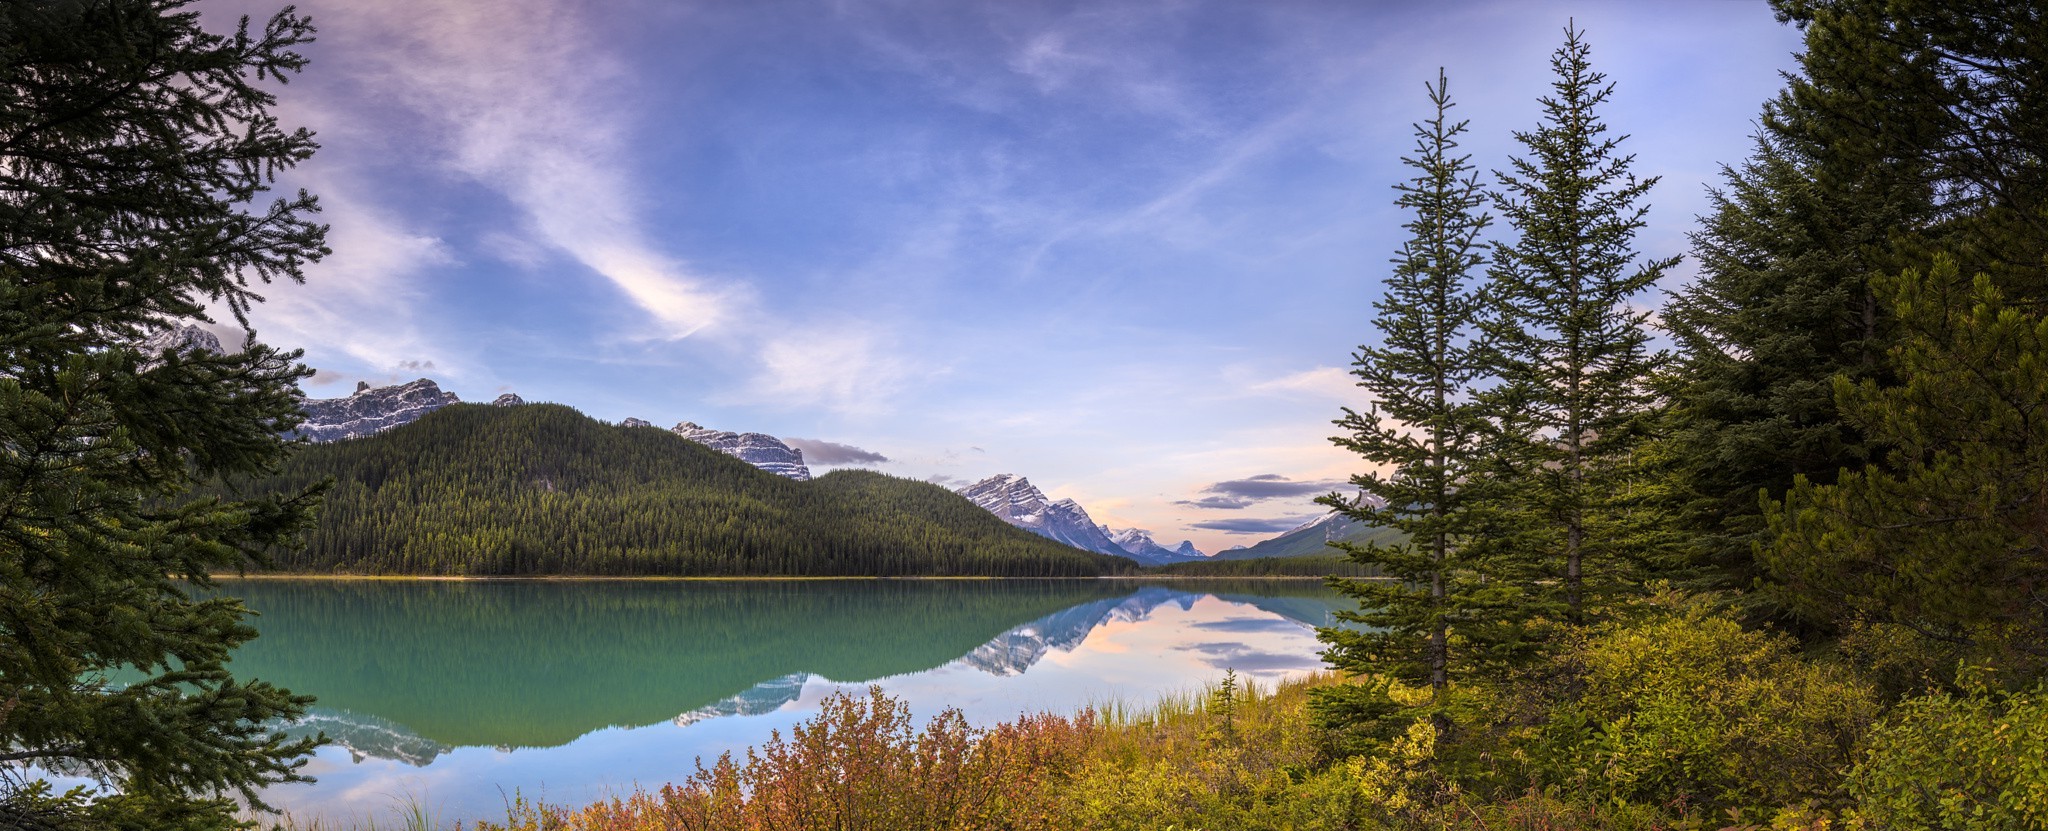 panoramas, Canada, Lake, Mountain, Forest, Snowy Peak, Water, Shrubs, Trees, Calm, Landscape, Nature Wallpaper